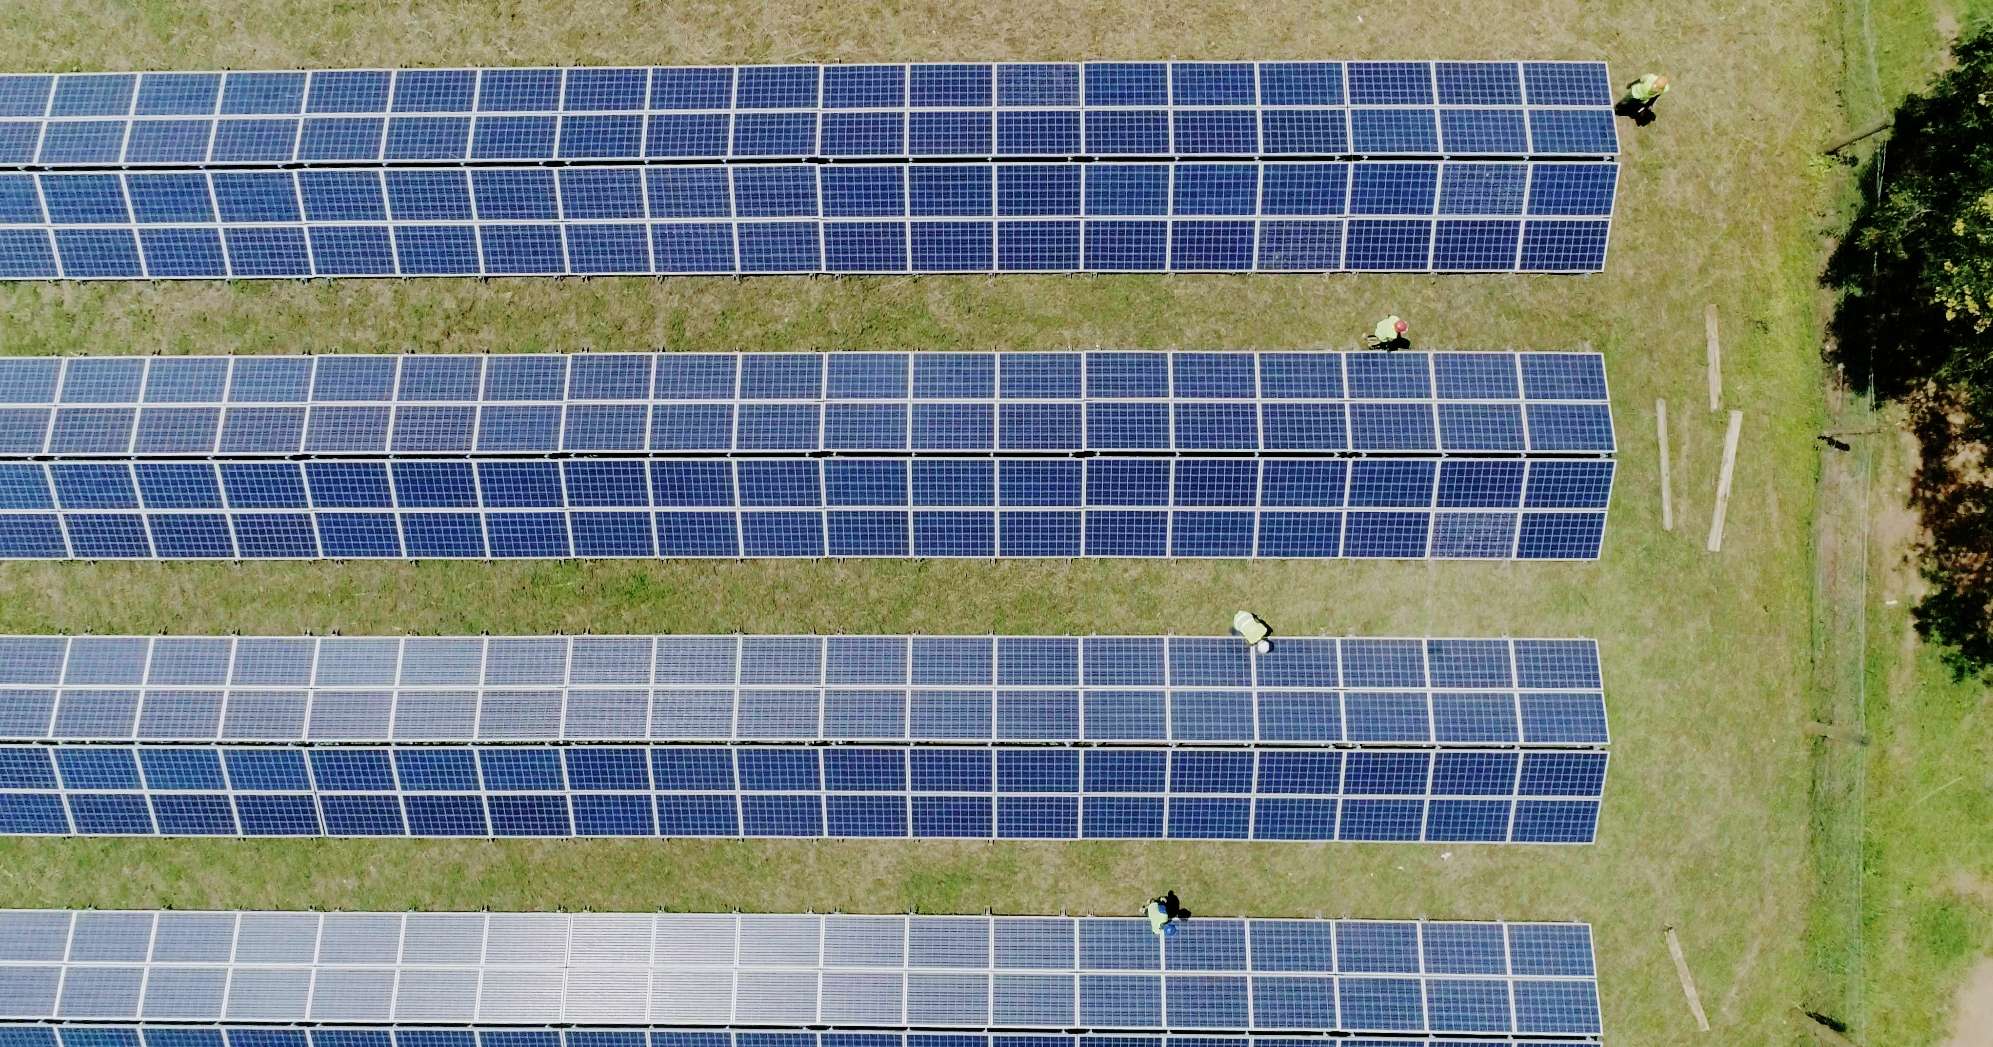 Solar panels seen from above